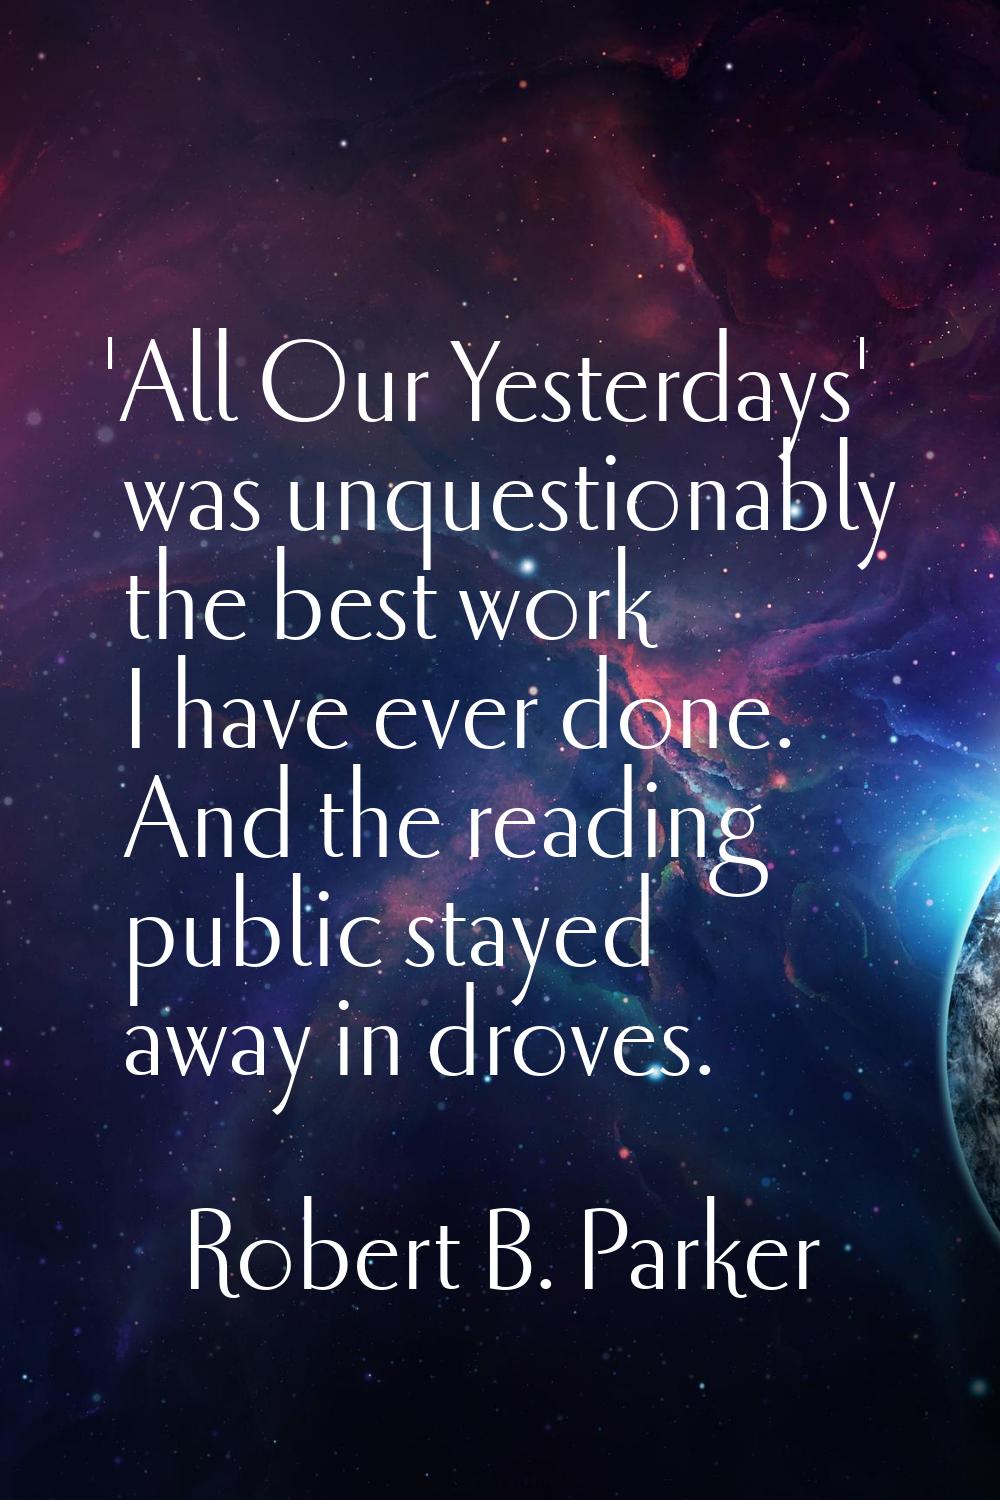 'All Our Yesterdays' was unquestionably the best work I have ever done. And the reading public stay